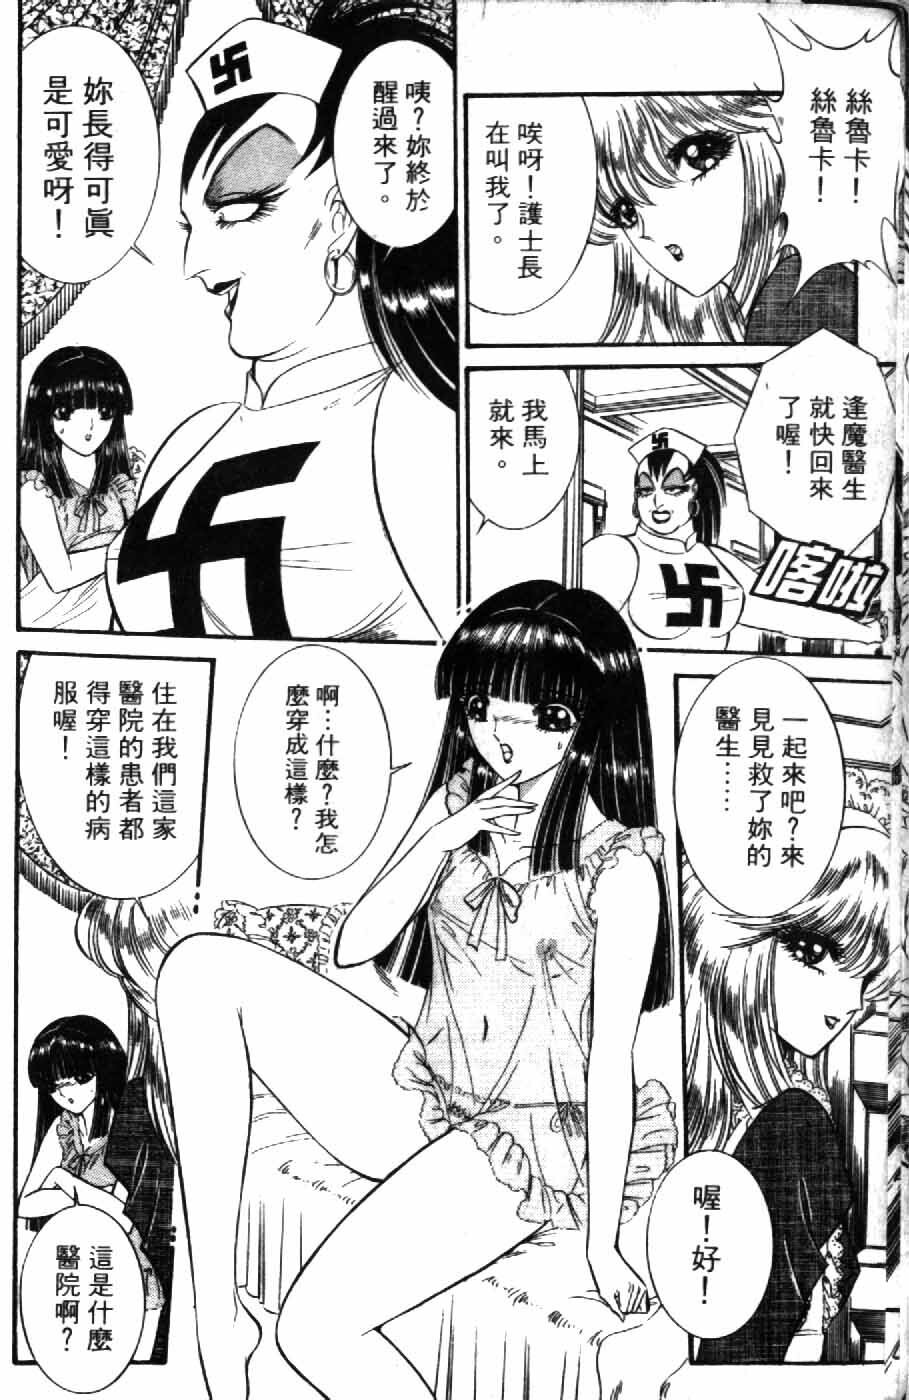 [Senno Knife] Ouma ga Horror Show 1 - Trans Sexual Special Show 1 | 顫慄博覽會 1 [Chinese] page 8 full